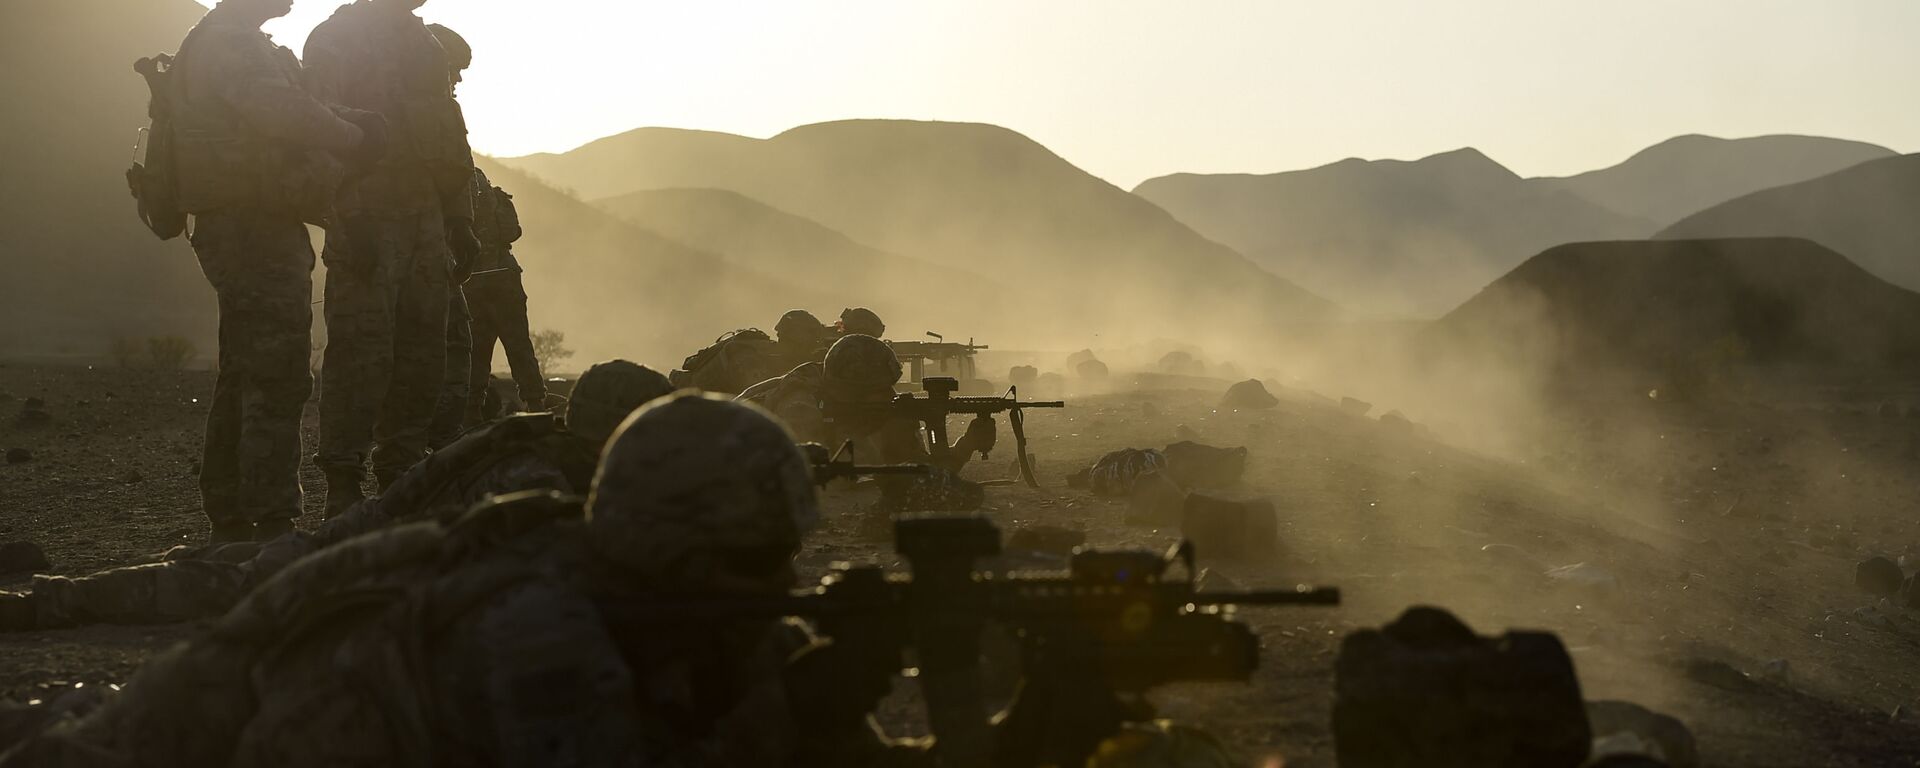 U.S. Army Soldiers with 3rd Platoon, Battle Company, 1-32 Infantry, 1st Brigade Combat Team, 10th Mountain Division, assigned to Combined Joint Task Force Horn of Africa's East African Response Force, conduct a series of team stress shoots and support by fire exercises in Djibouti, Nov. 22, 2017 - Sputnik International, 1920, 12.12.2021